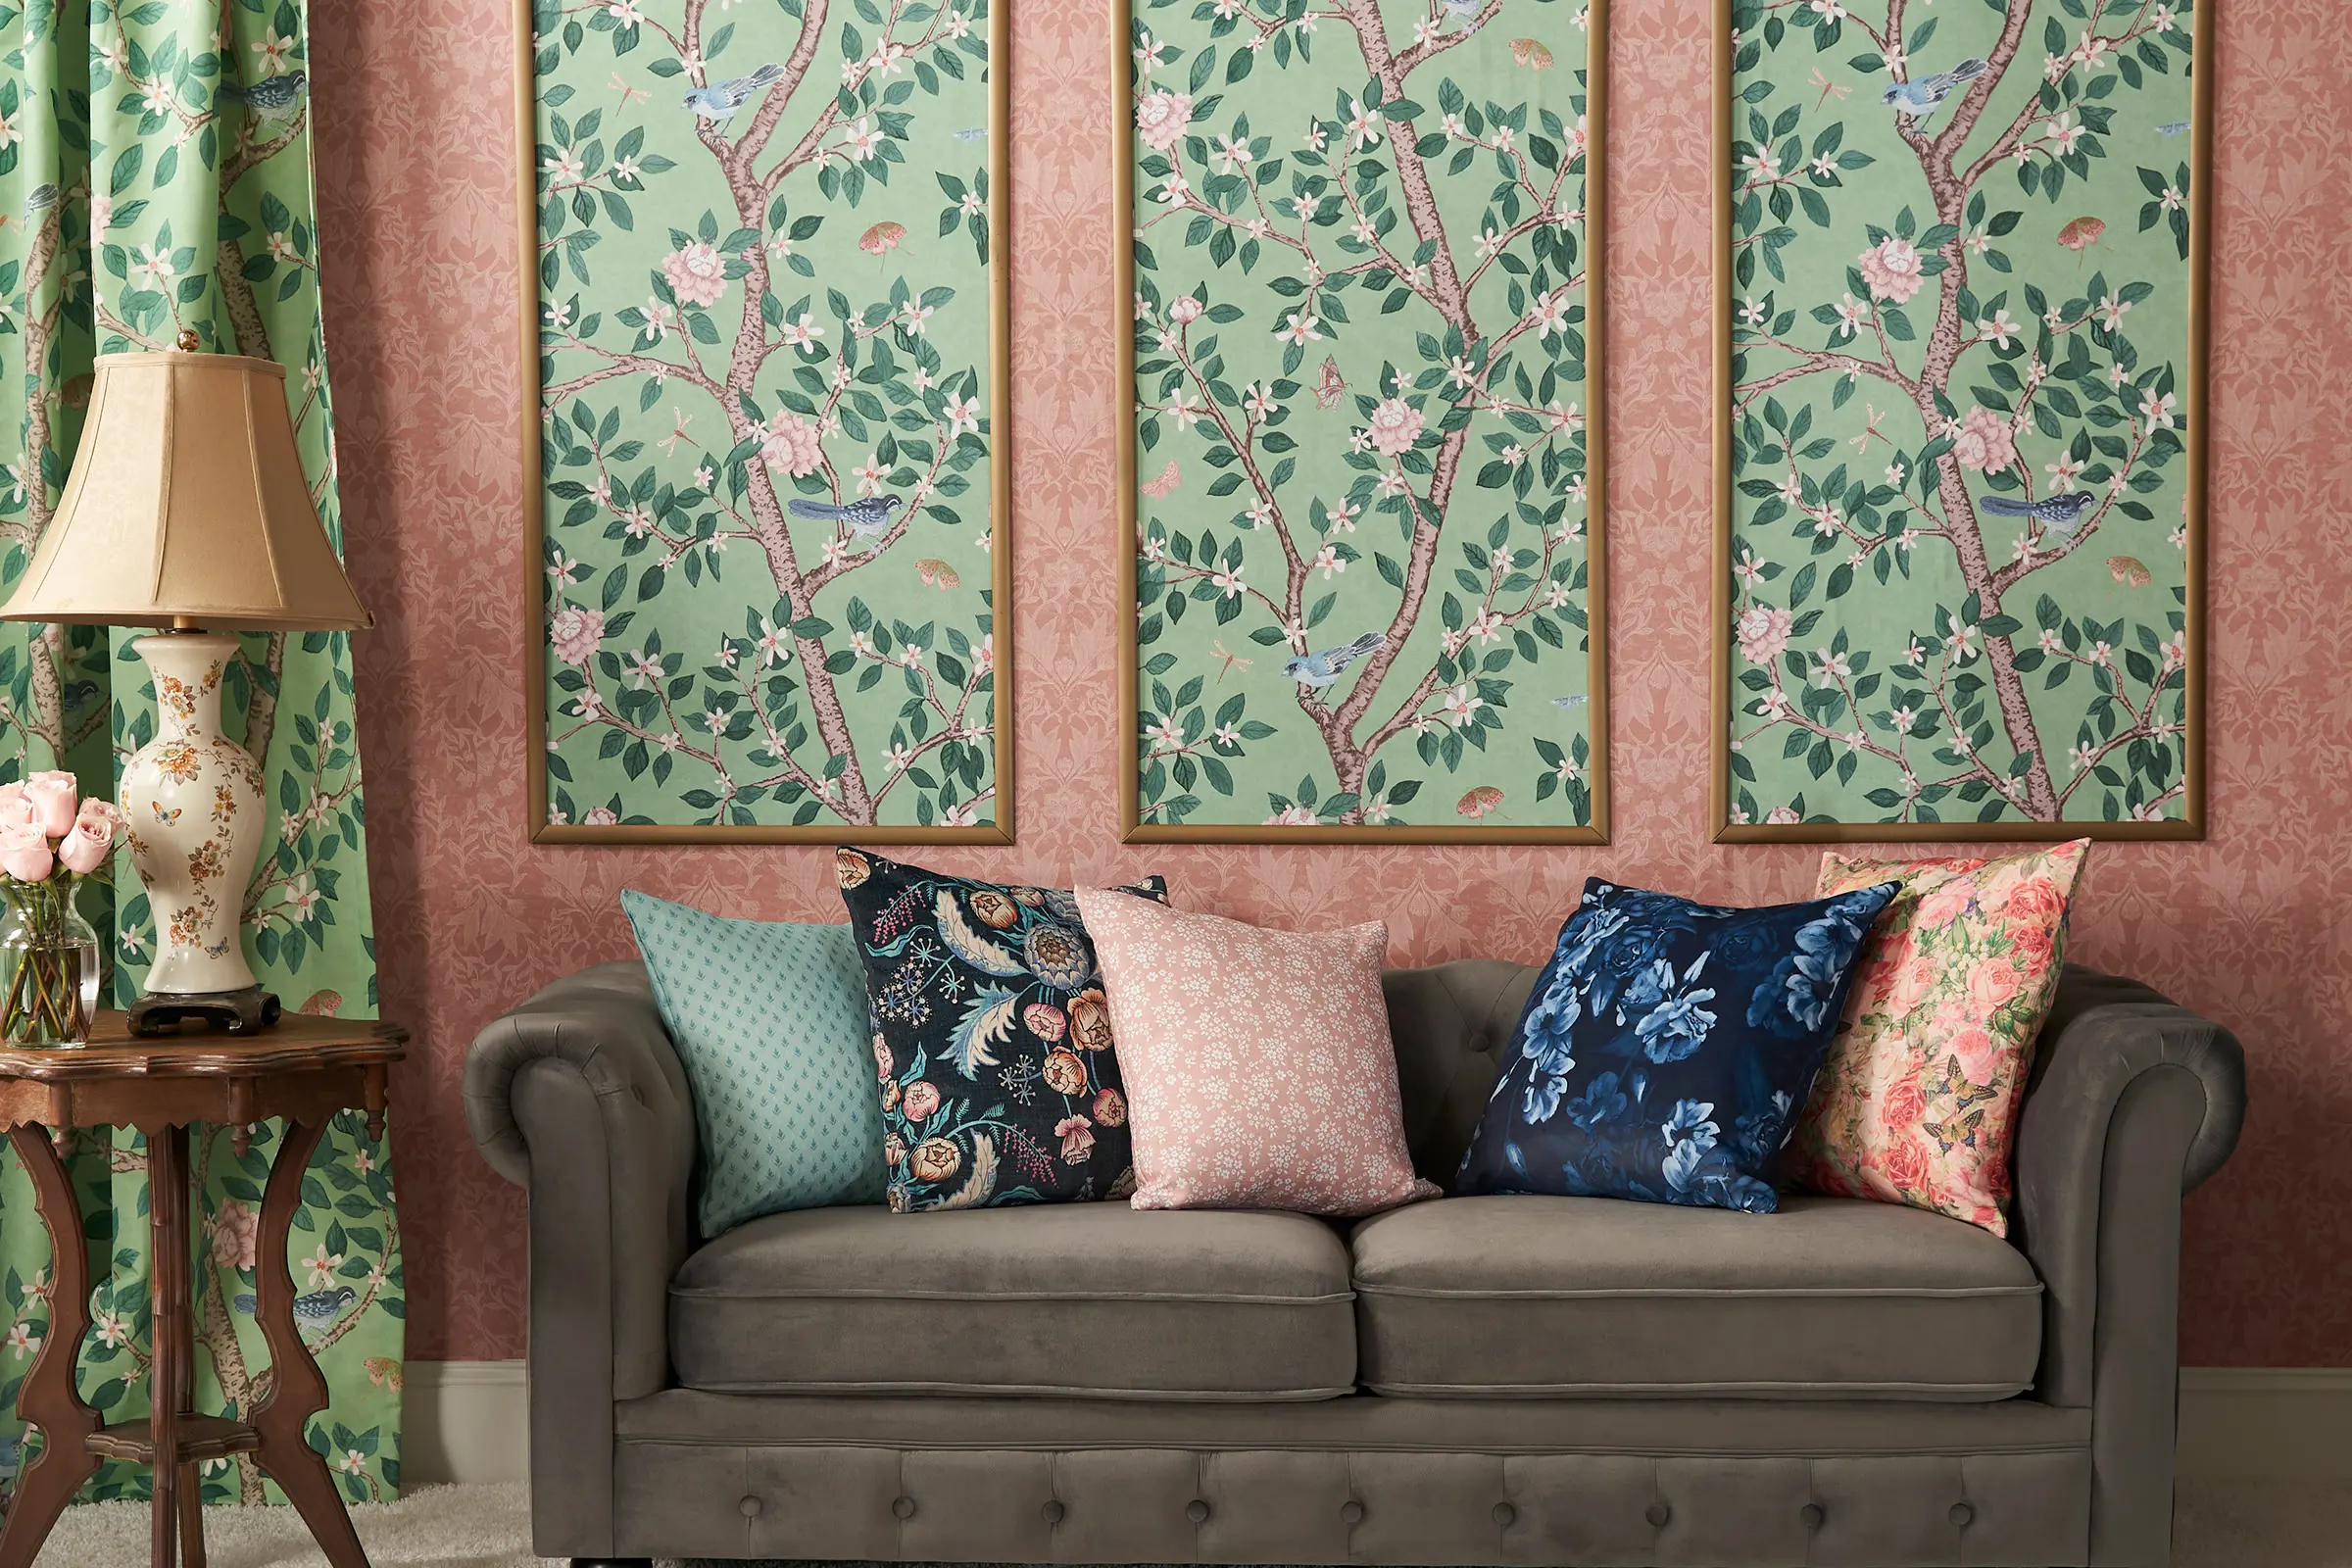 Living area with pink and green floral wallpaper, pillows and curtains.